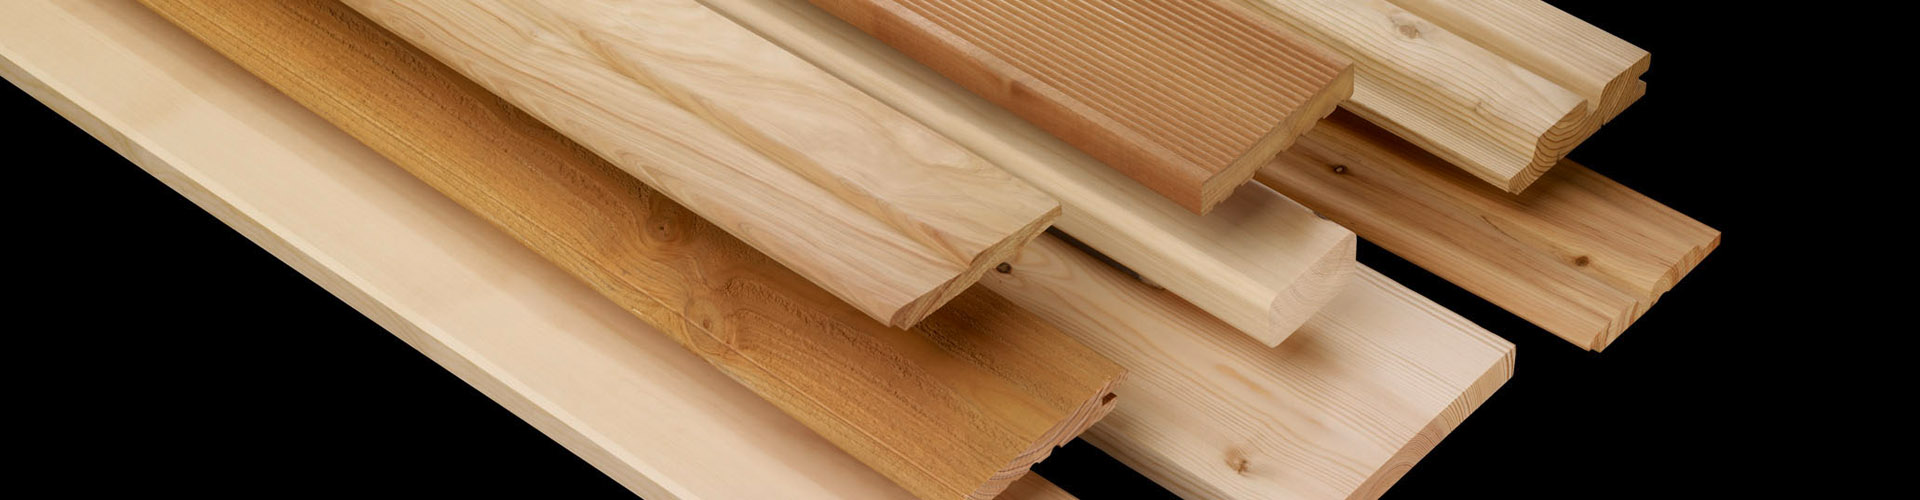 moulder woodworking examples